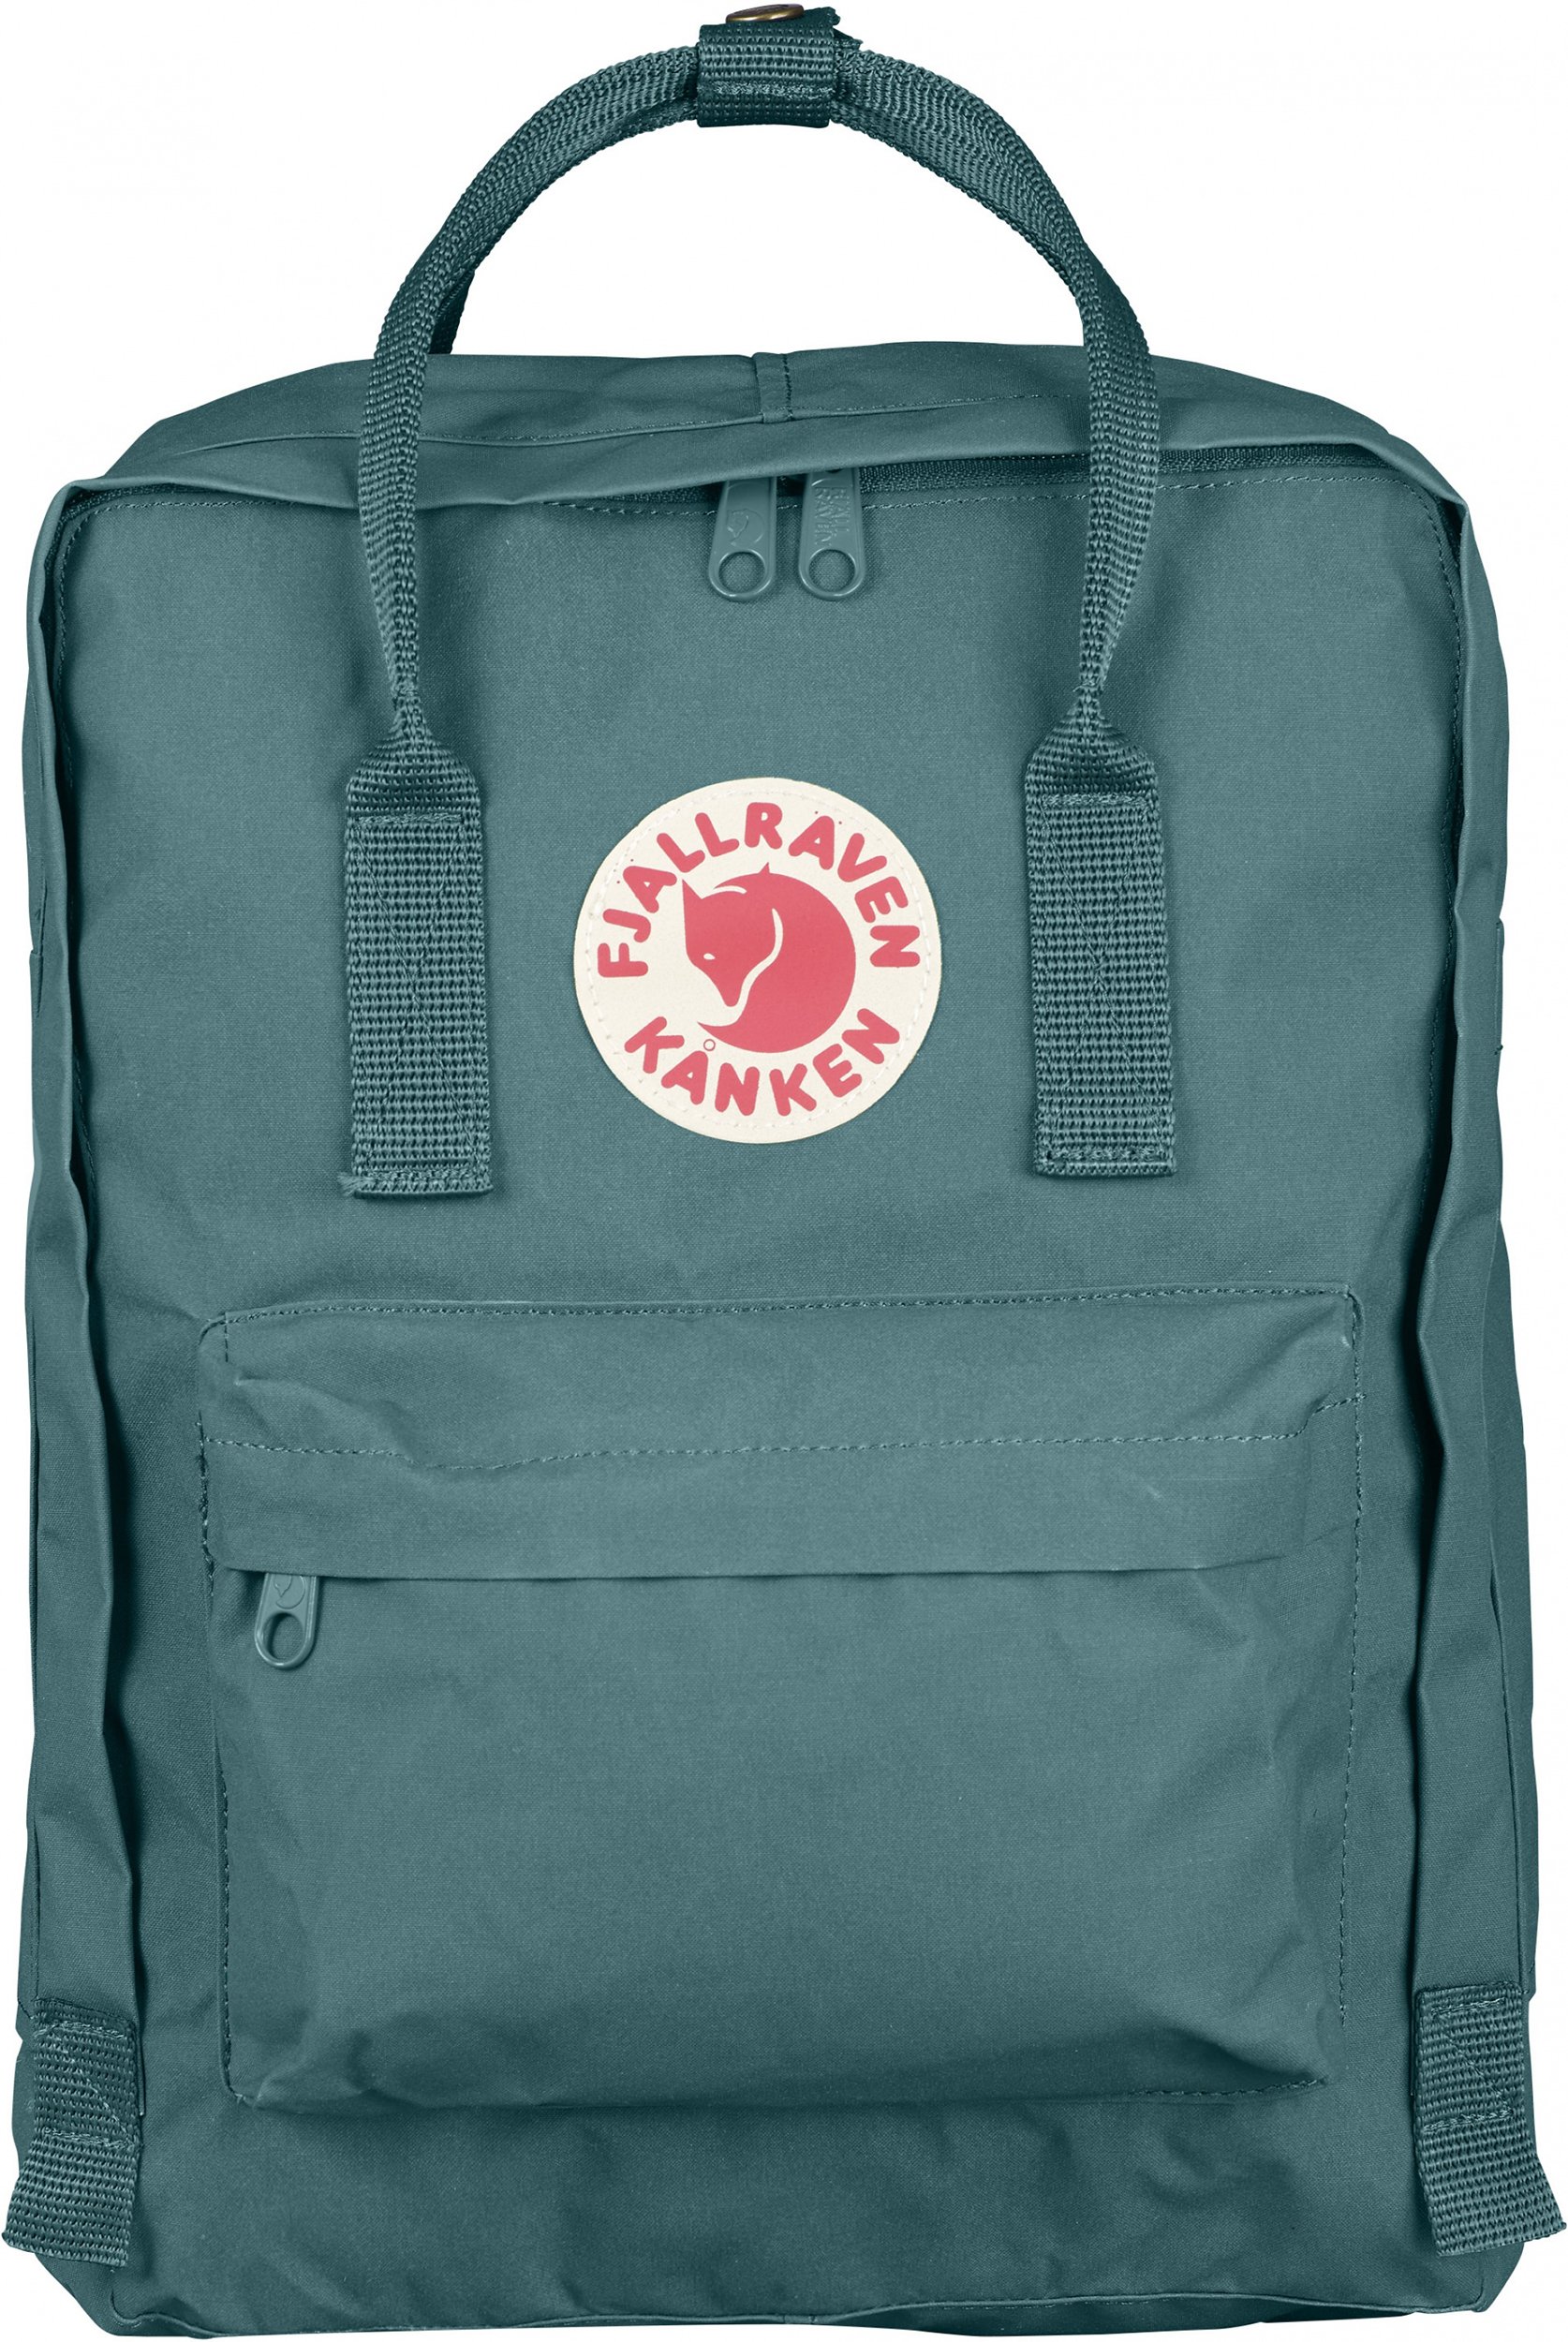 Pale forest green backpack on a white background.